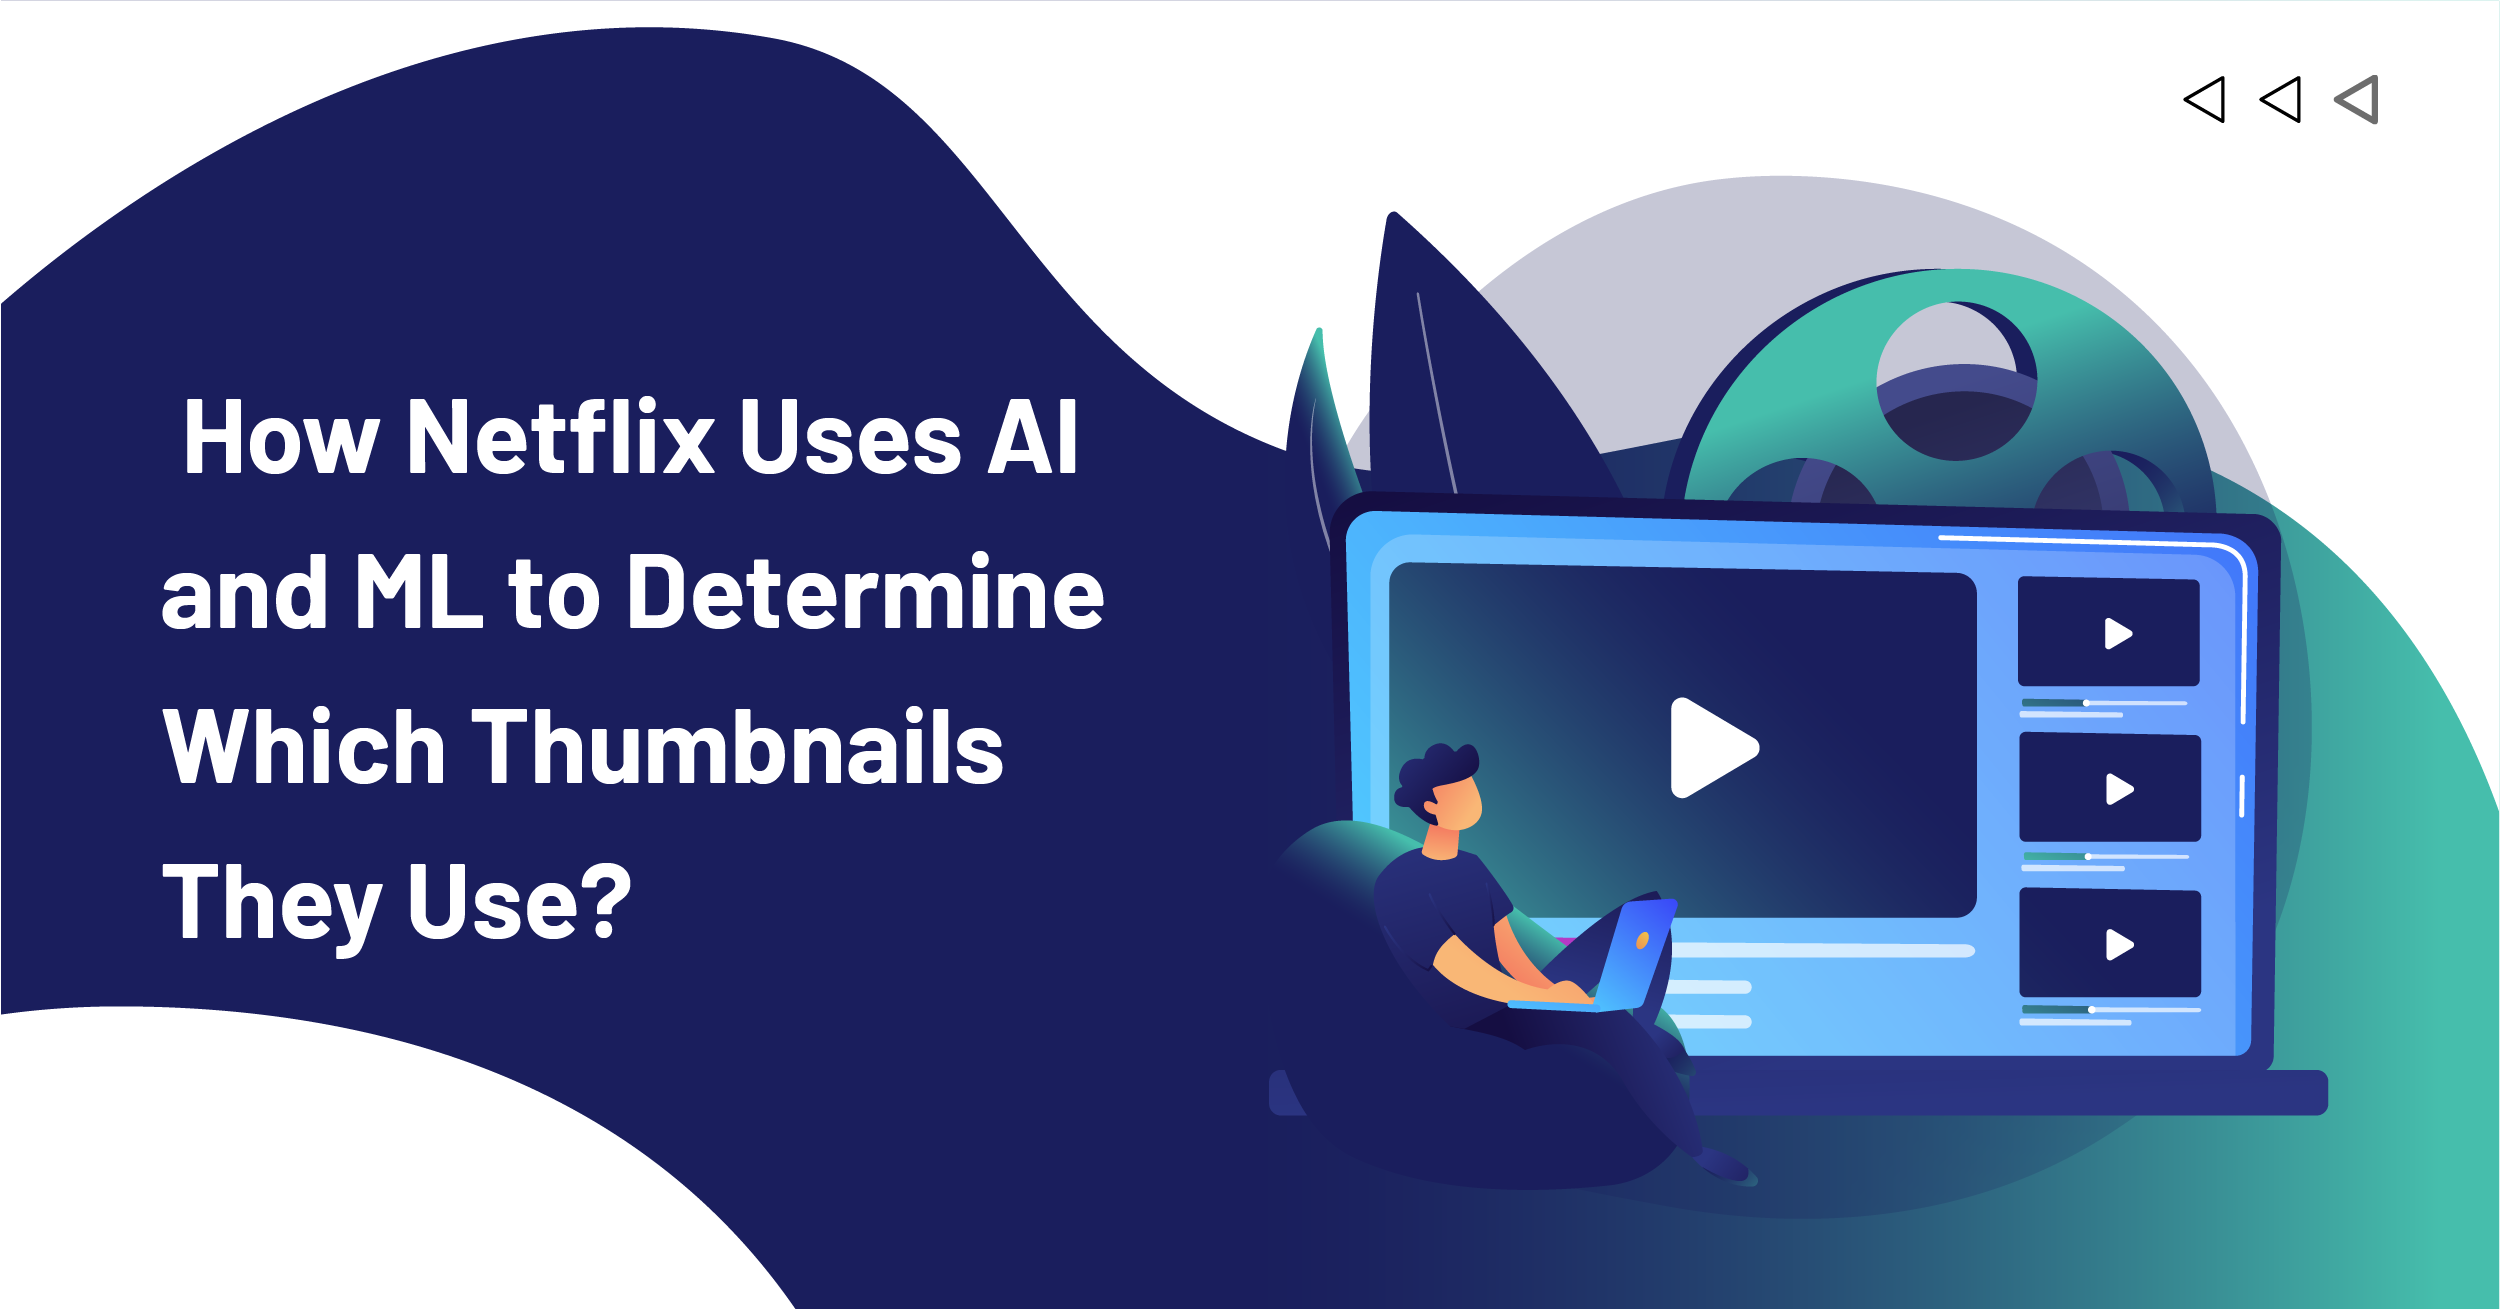 How Netflix Uses AI and ML to Determine Which Thumbnails They Use